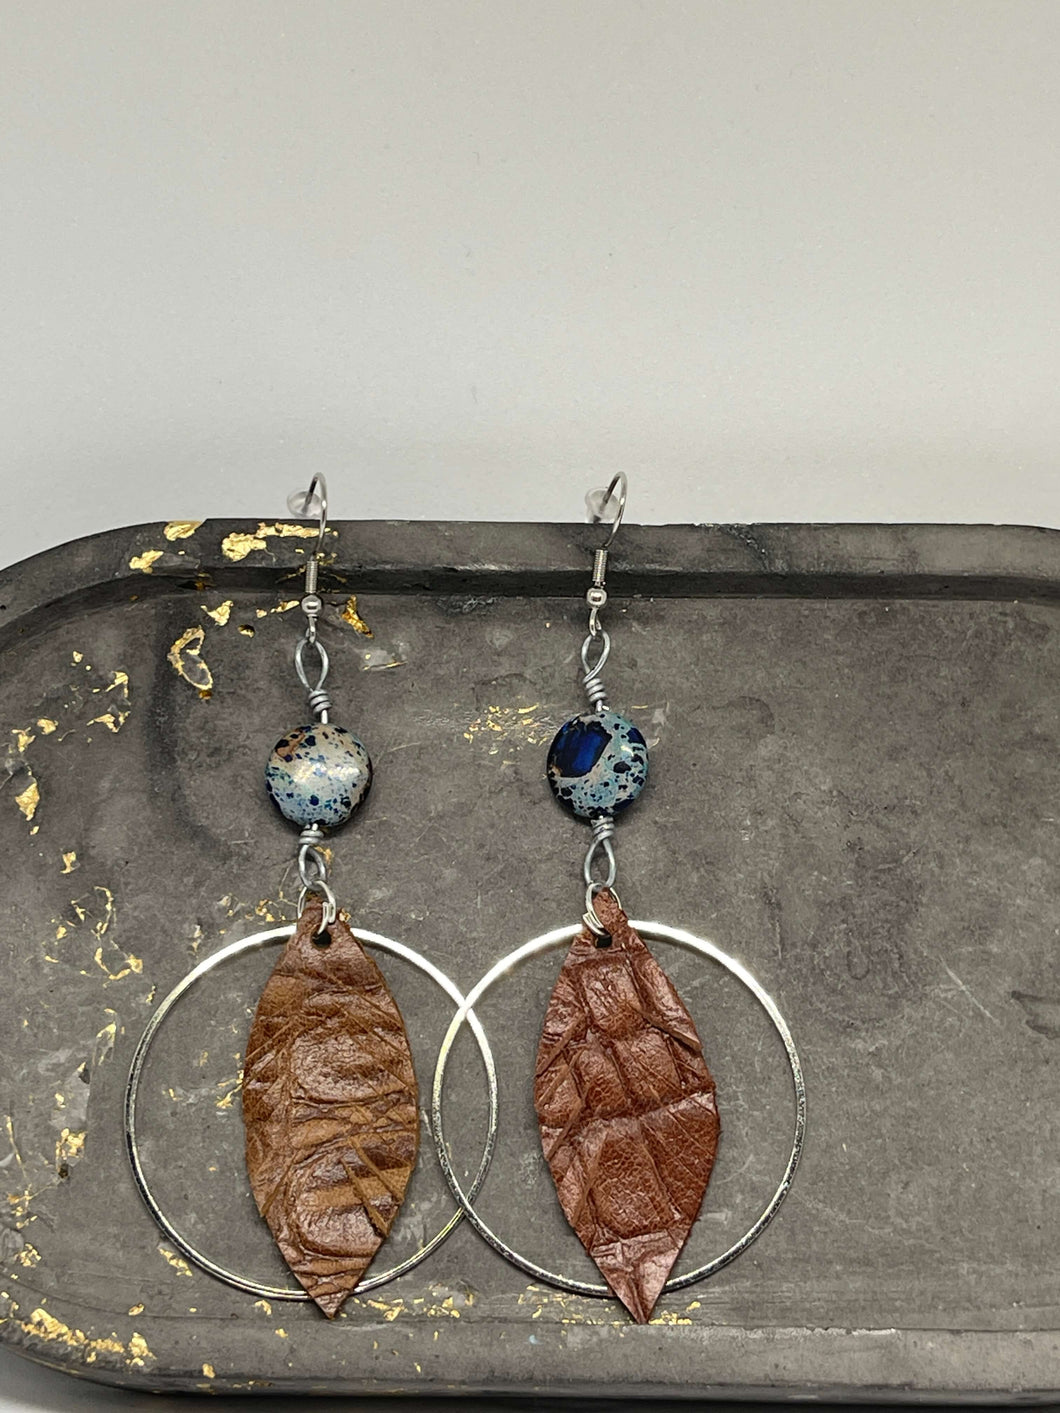 Beaded Earrings - Feather in a Hoop (Brown and Marbled Blue)